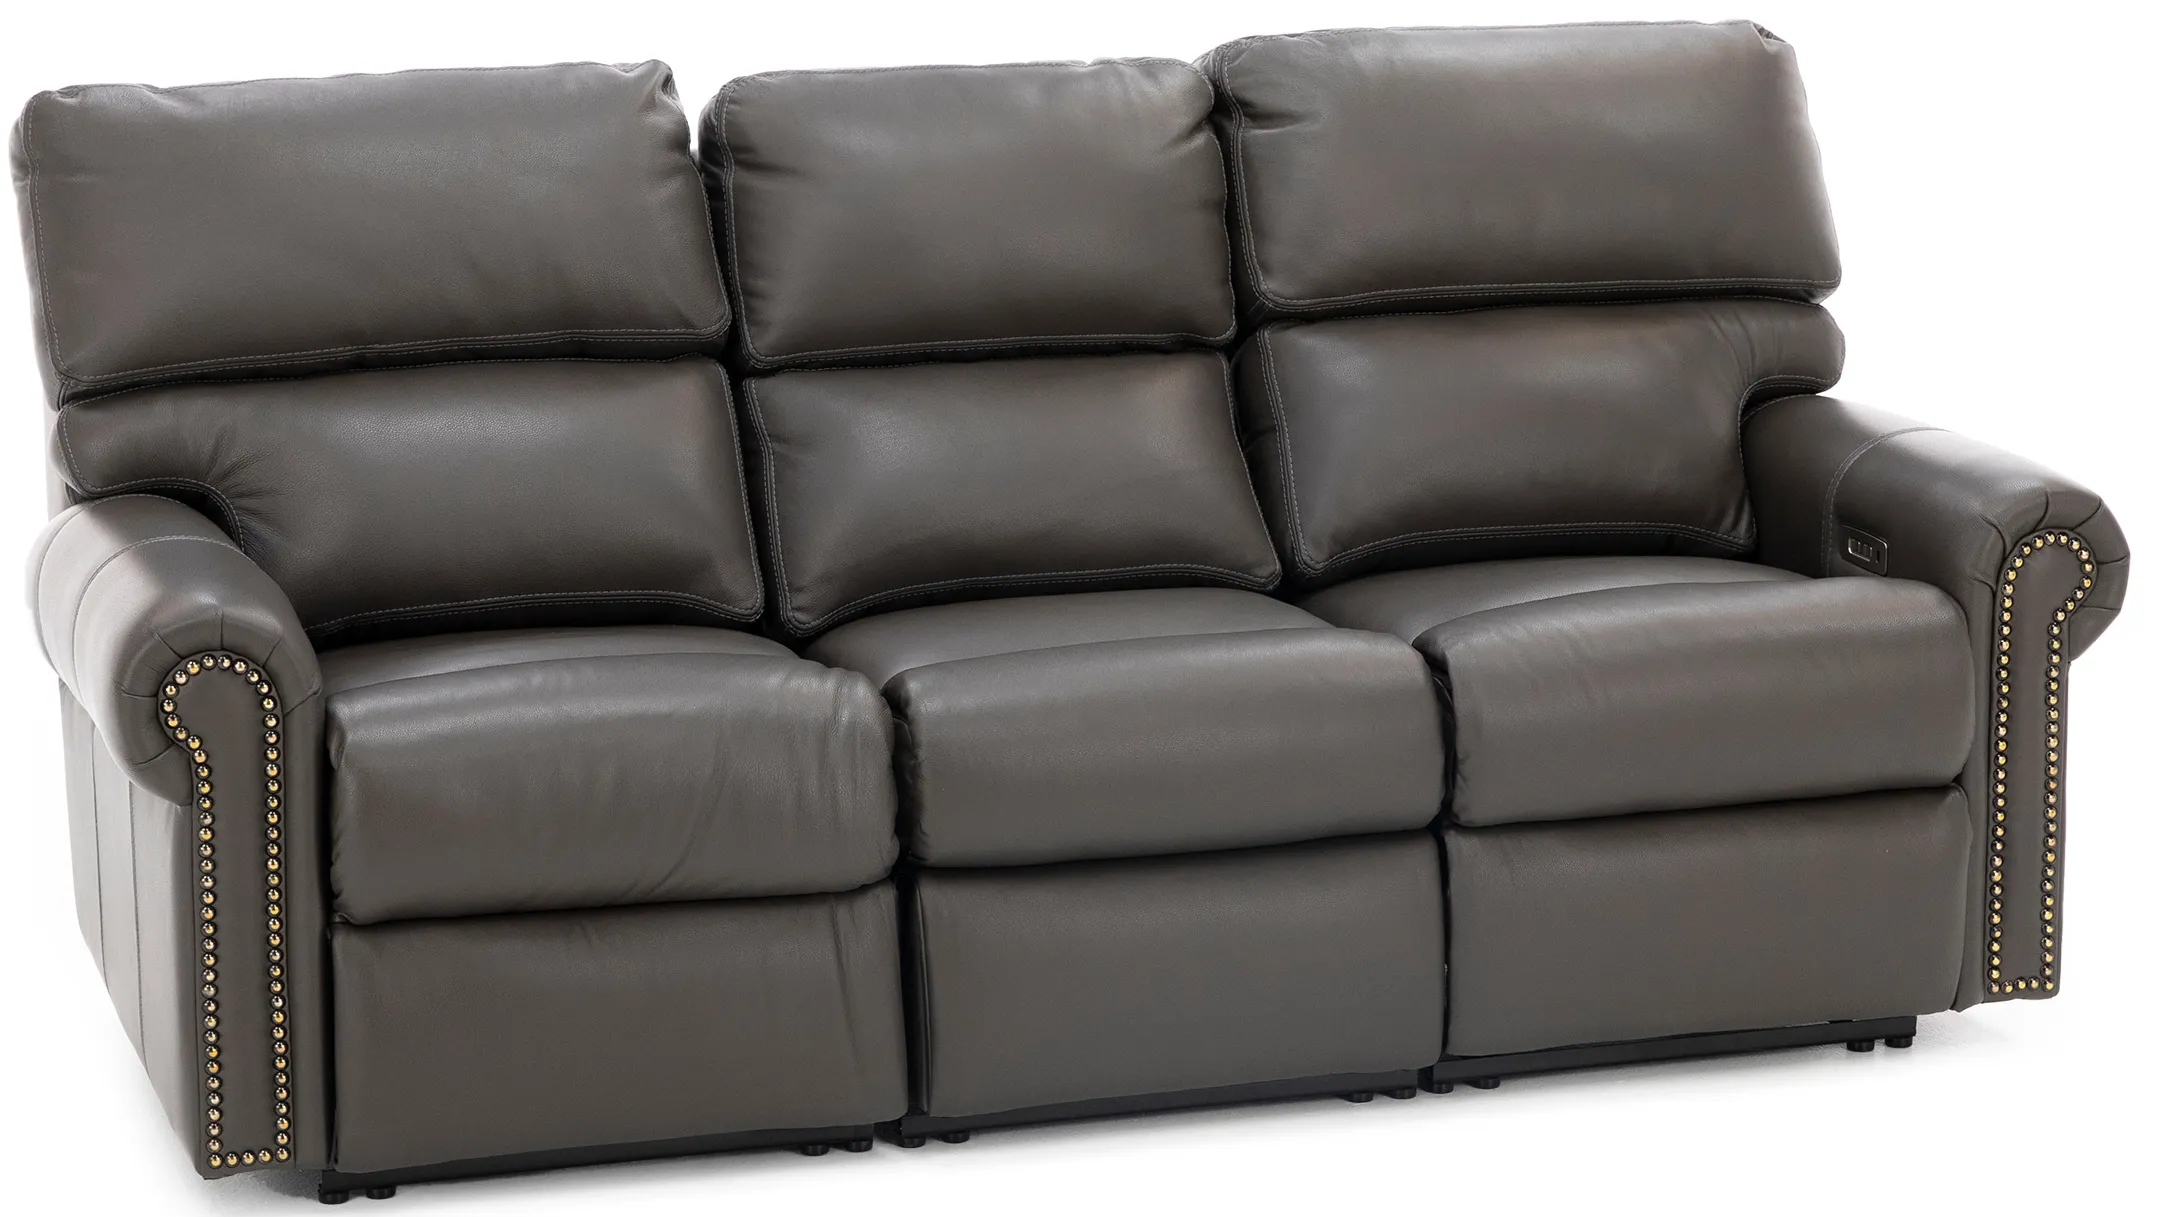 Design and Recline Connor 3-Pc. Leather Power Reclining Sofa